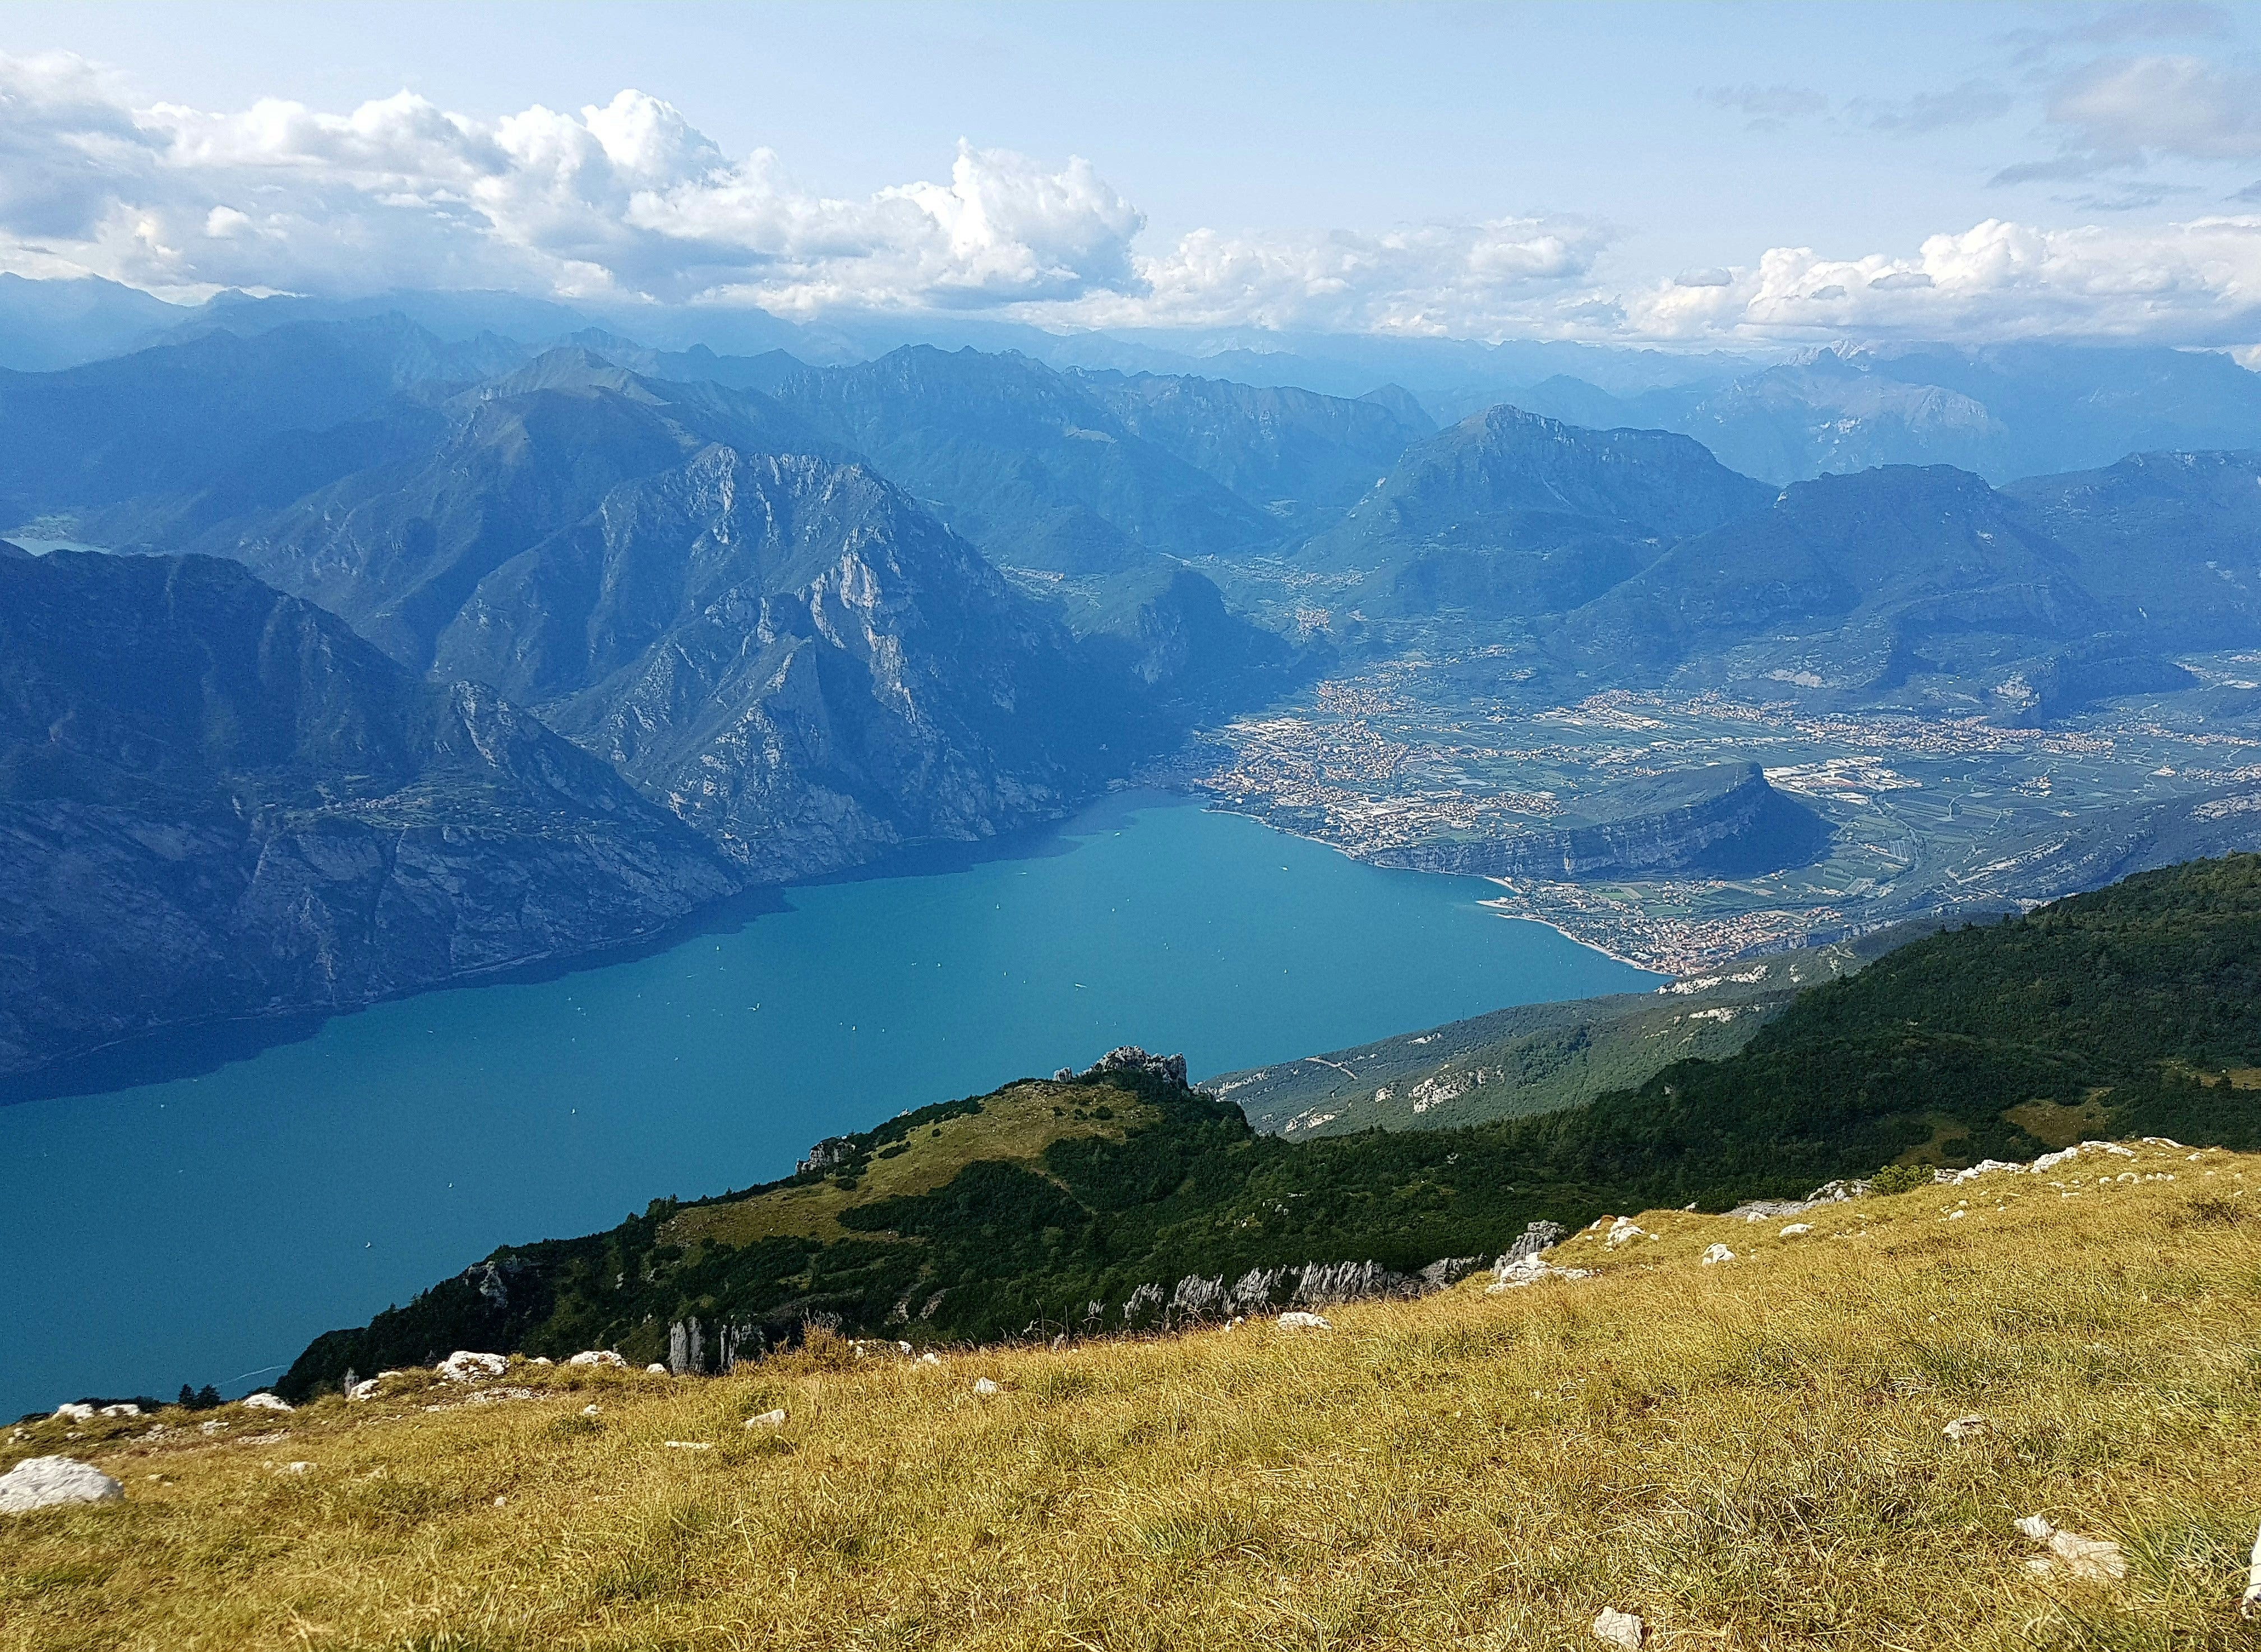 A cable car whisks visitors up Monte Baldo is just 15 minutes